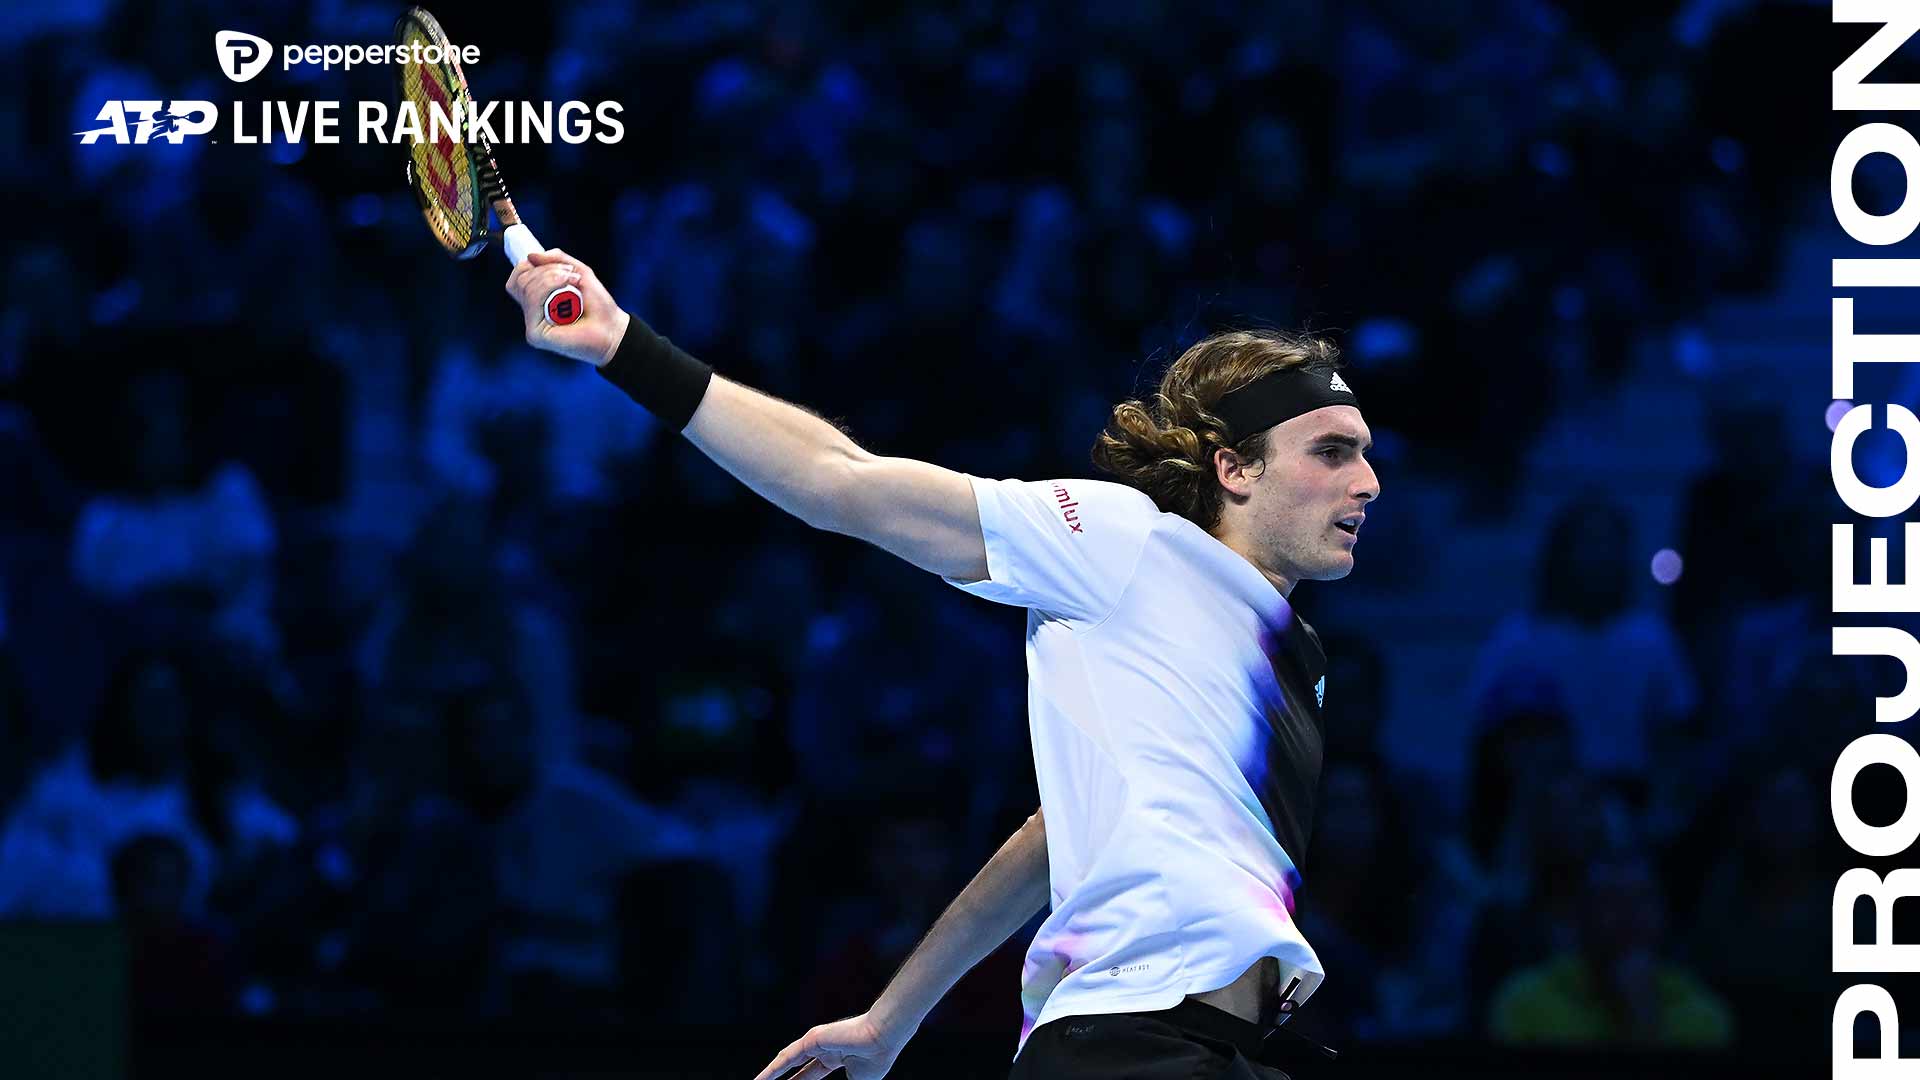 Stefanos Tsitsipas has been eliminated from the year-end No. 1 battle.